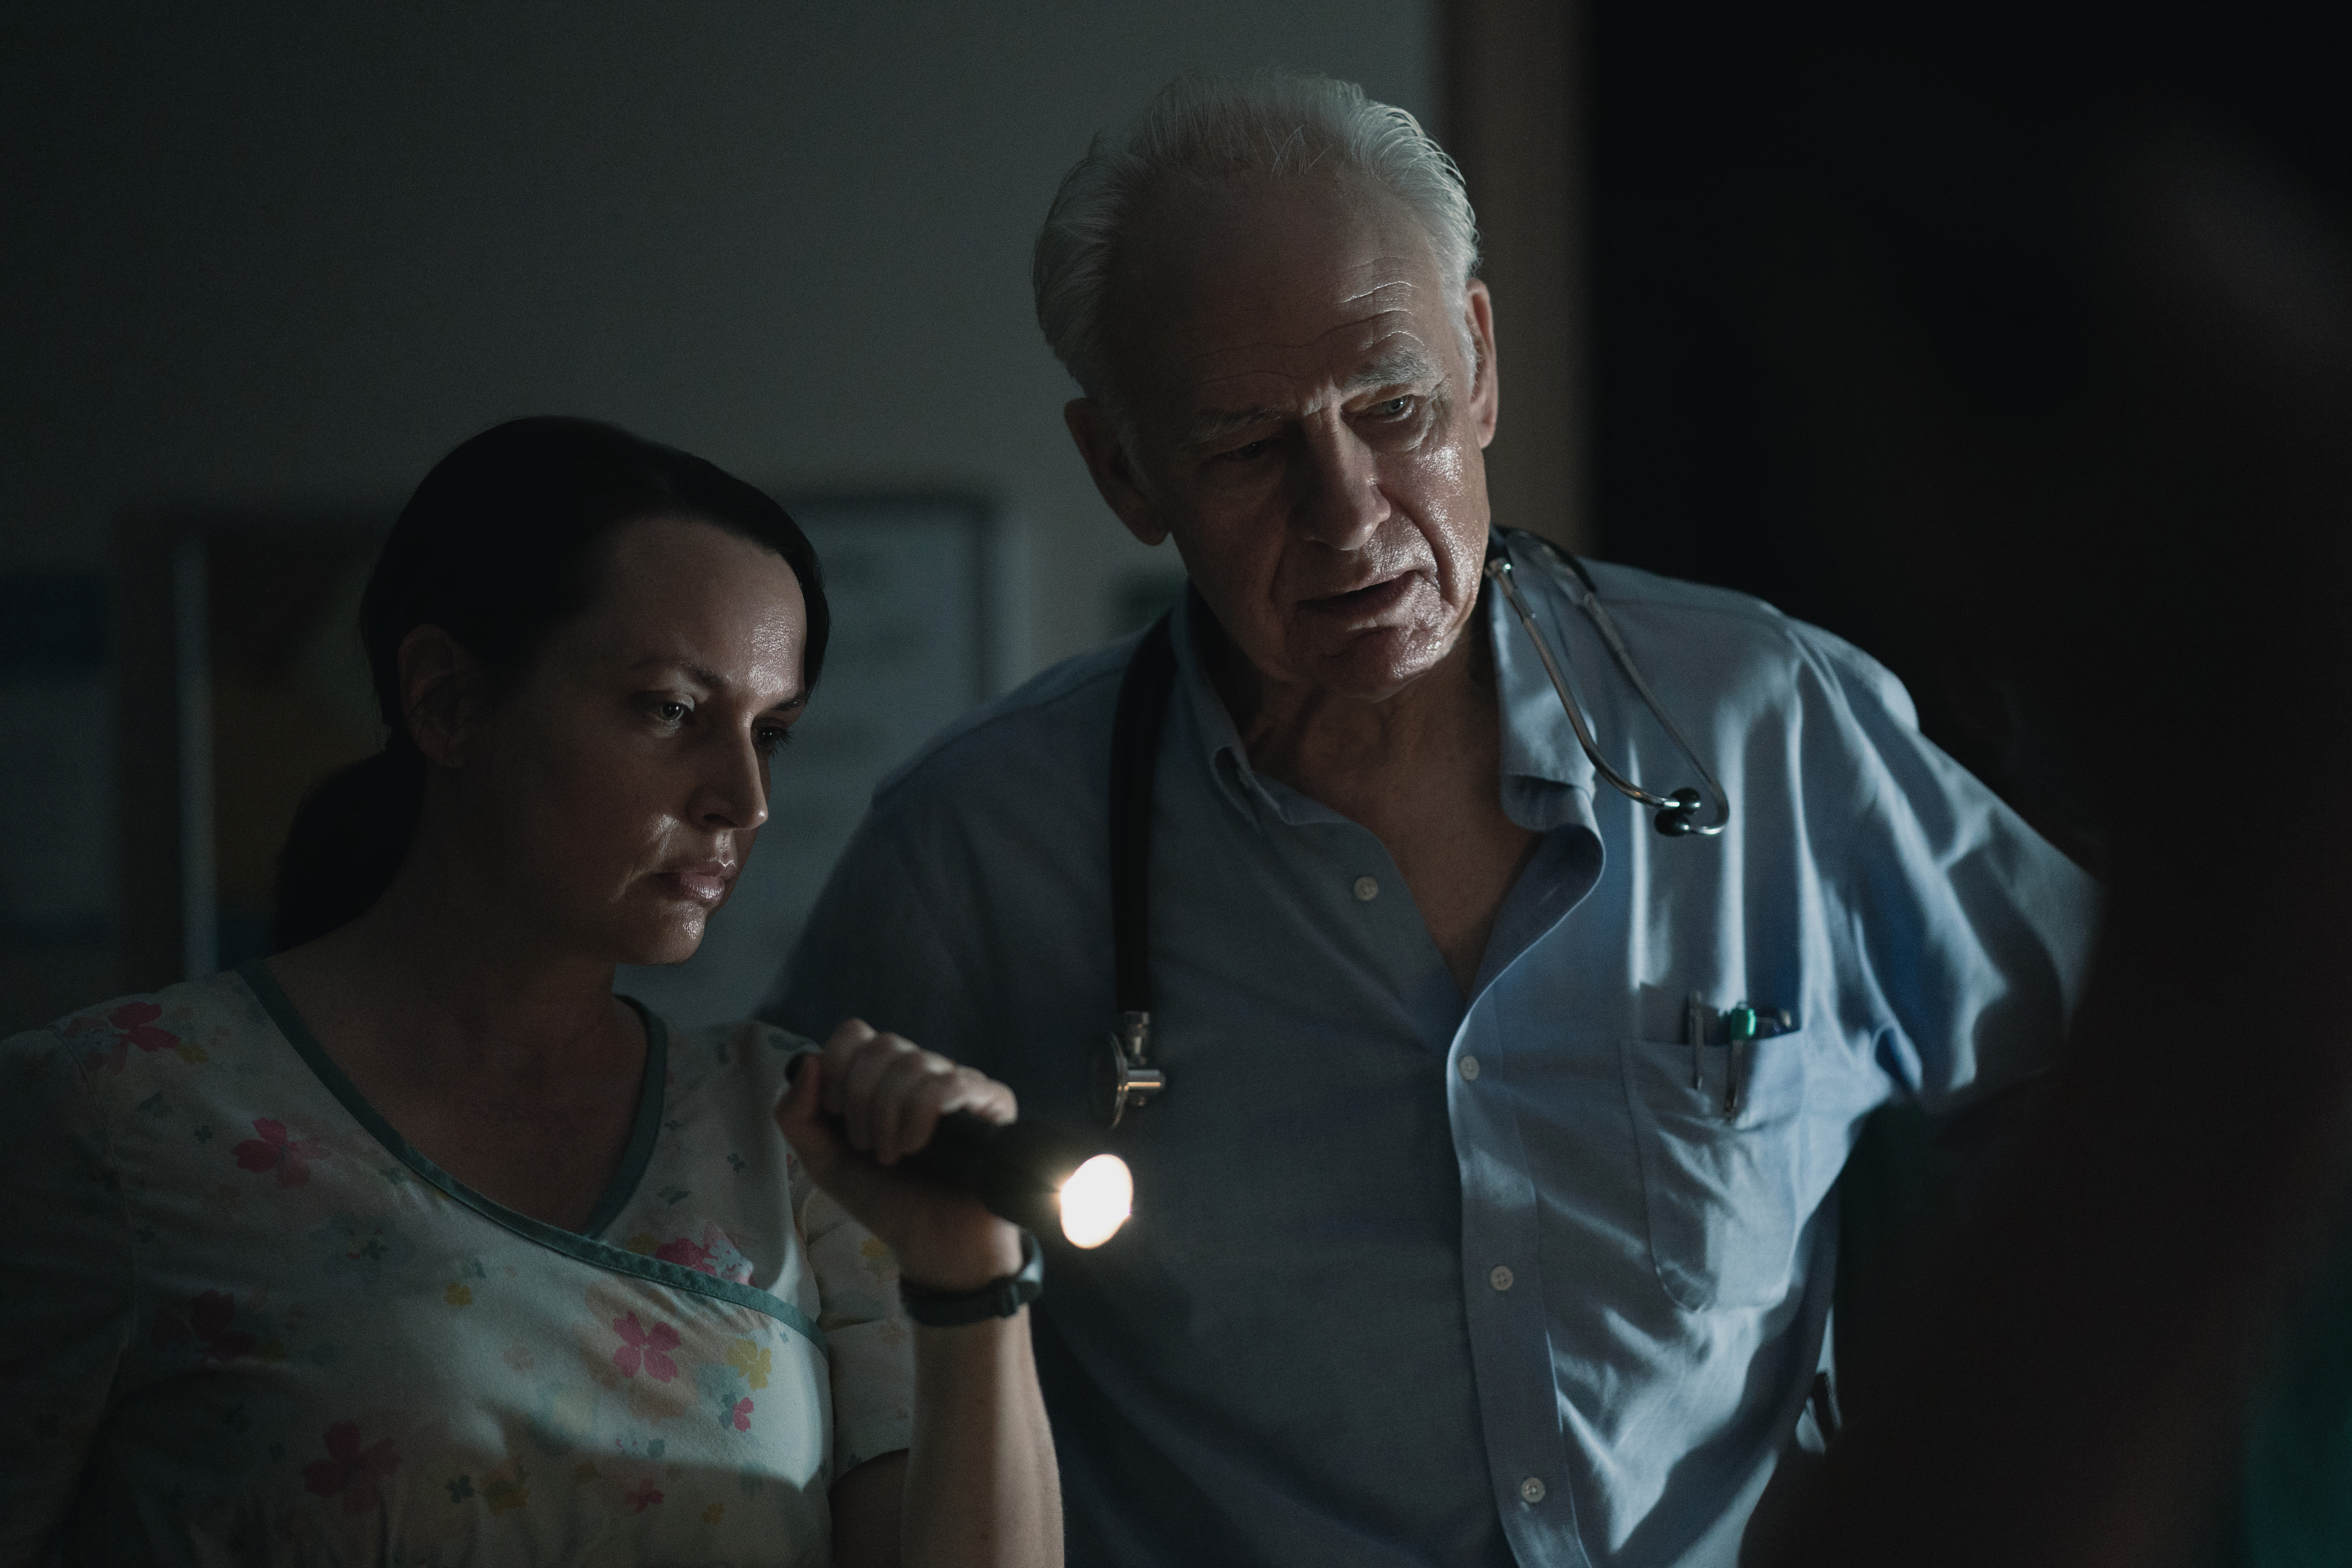 'Five Days At Memorial': Julie Ann Emery and Robert Pine looking at something together with a flashlight